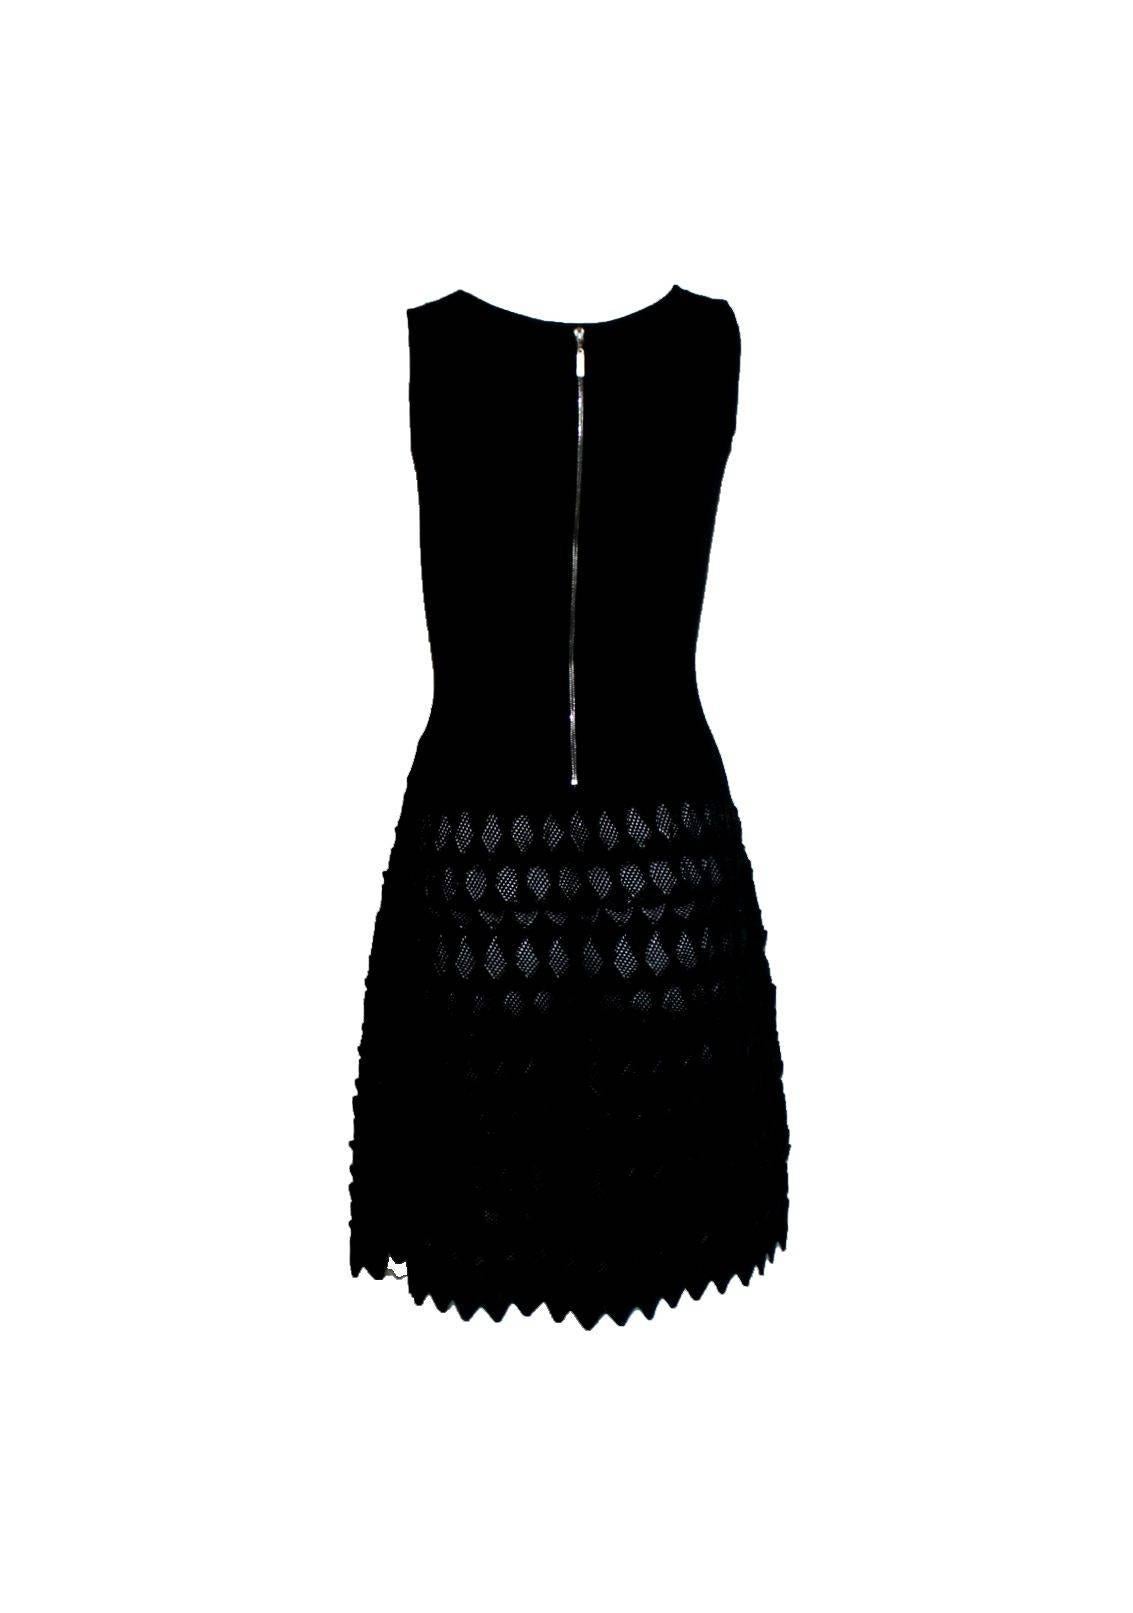 A new interpretation of the timeless Chanel classic little black dress
Chanel signature dress that will last for many years
3D crochet knit skirt part
With zipper detail both in front and back
Zipper can be opened for a sexy peek-a-boo look
CC logo